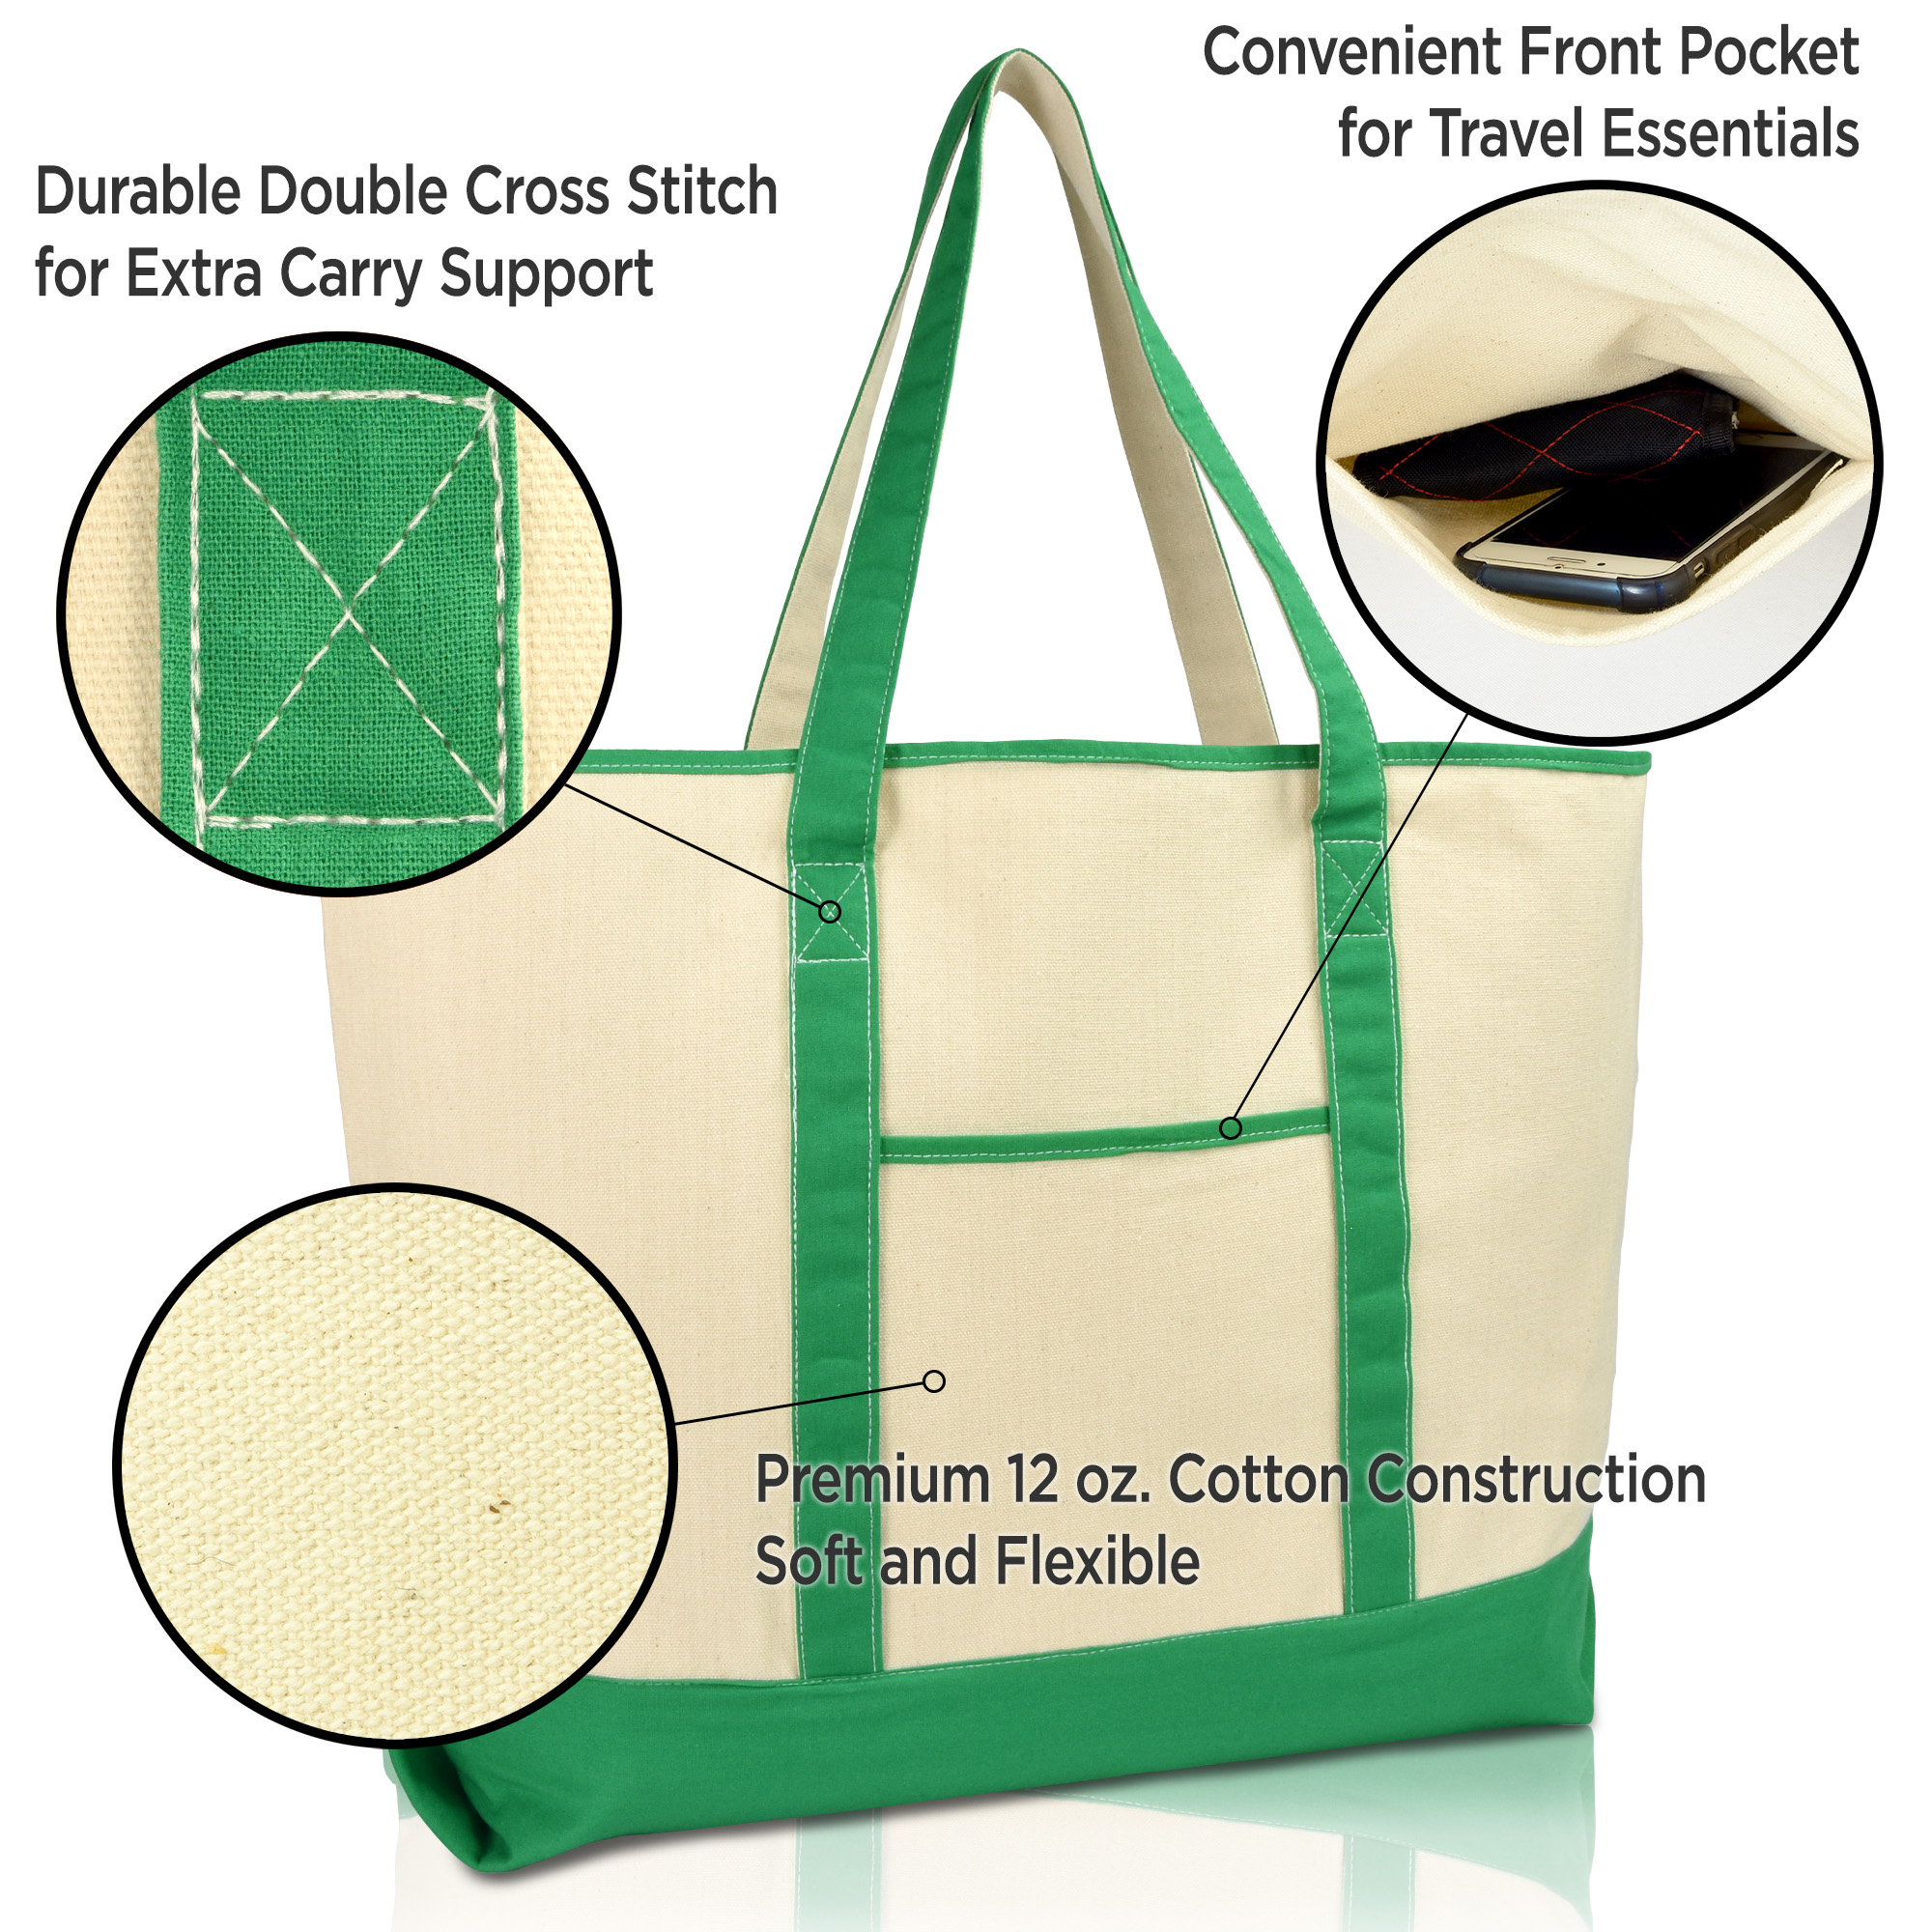 DALIX 22" Open Top Deluxe Tote Bag with Outer Pocket in Dark Green - image 4 of 5